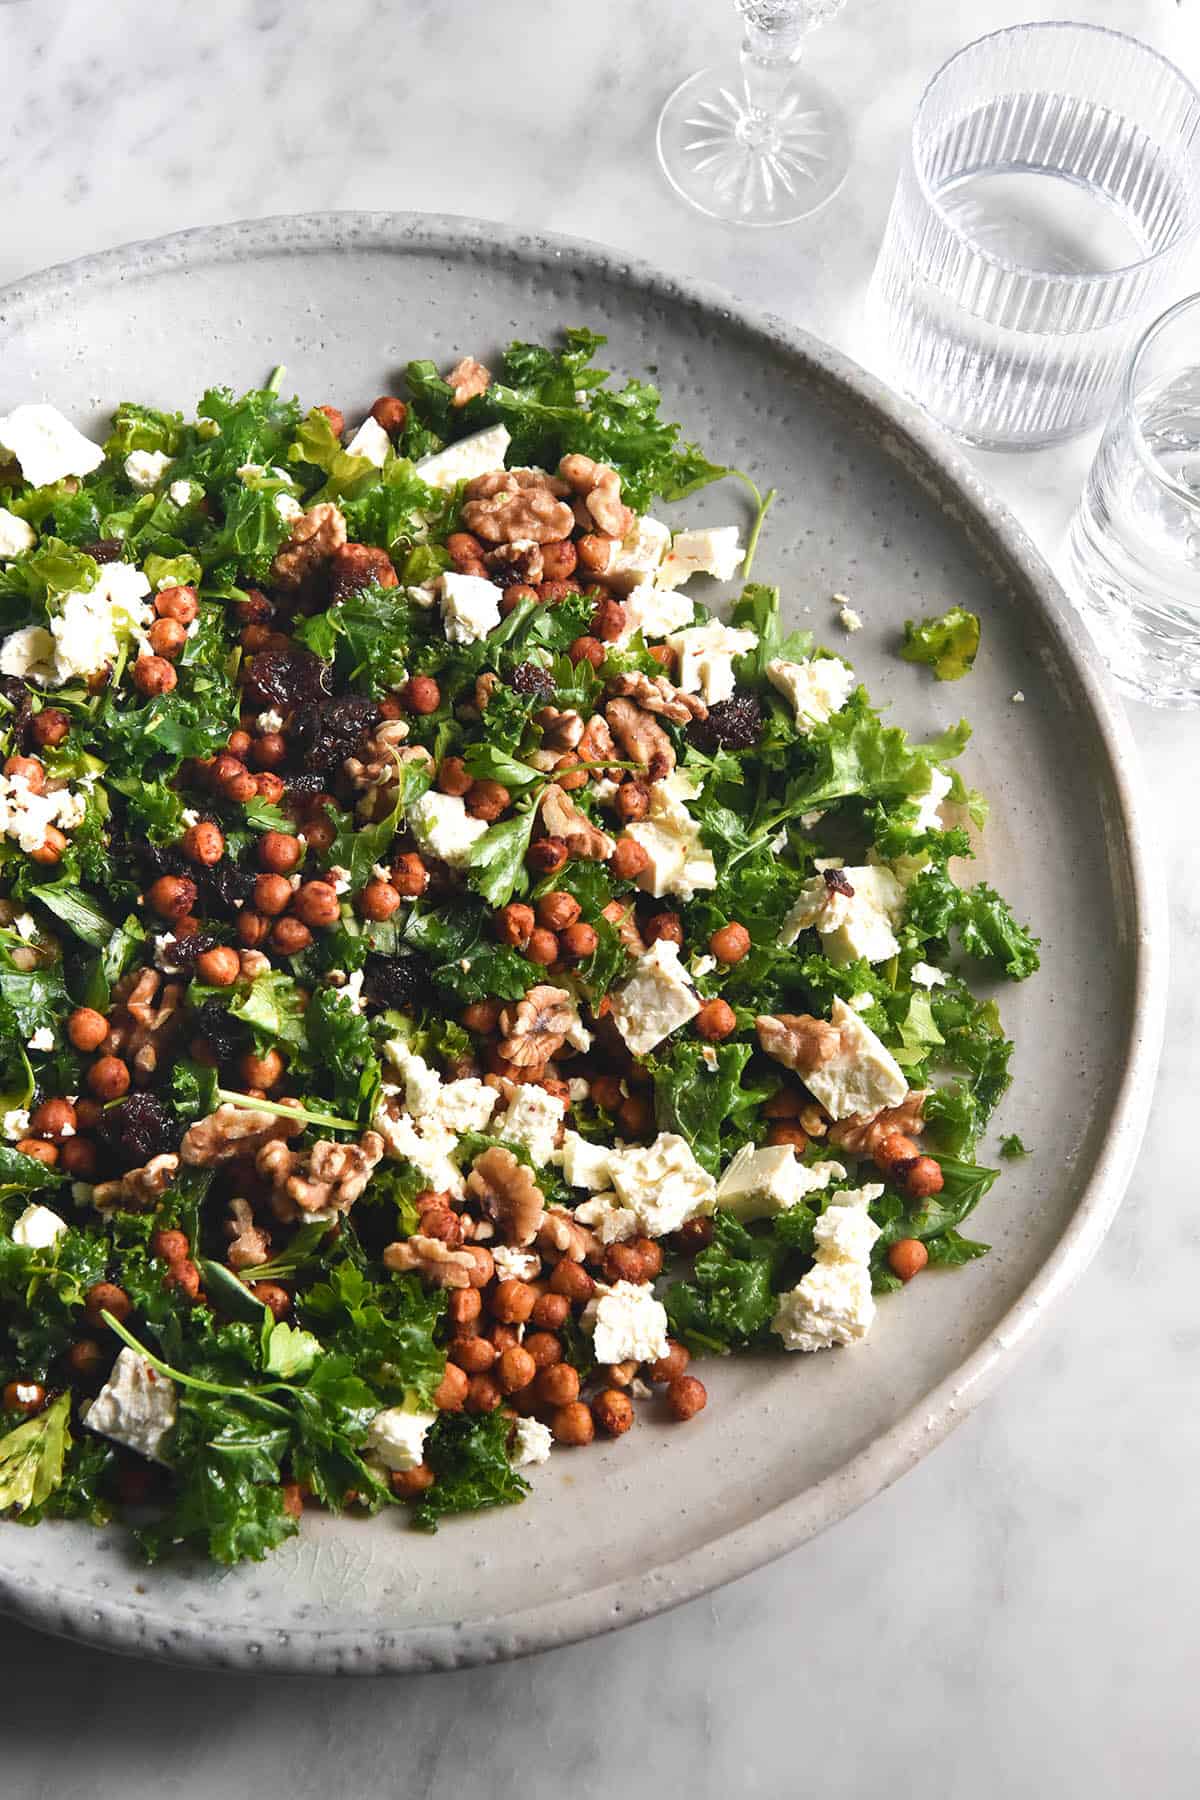 An aerial image of a kale, feta, raisin and walnut salad in a large white ceramic serving dish. The dish sits atop a white marble table and is surrounded by water glasses.